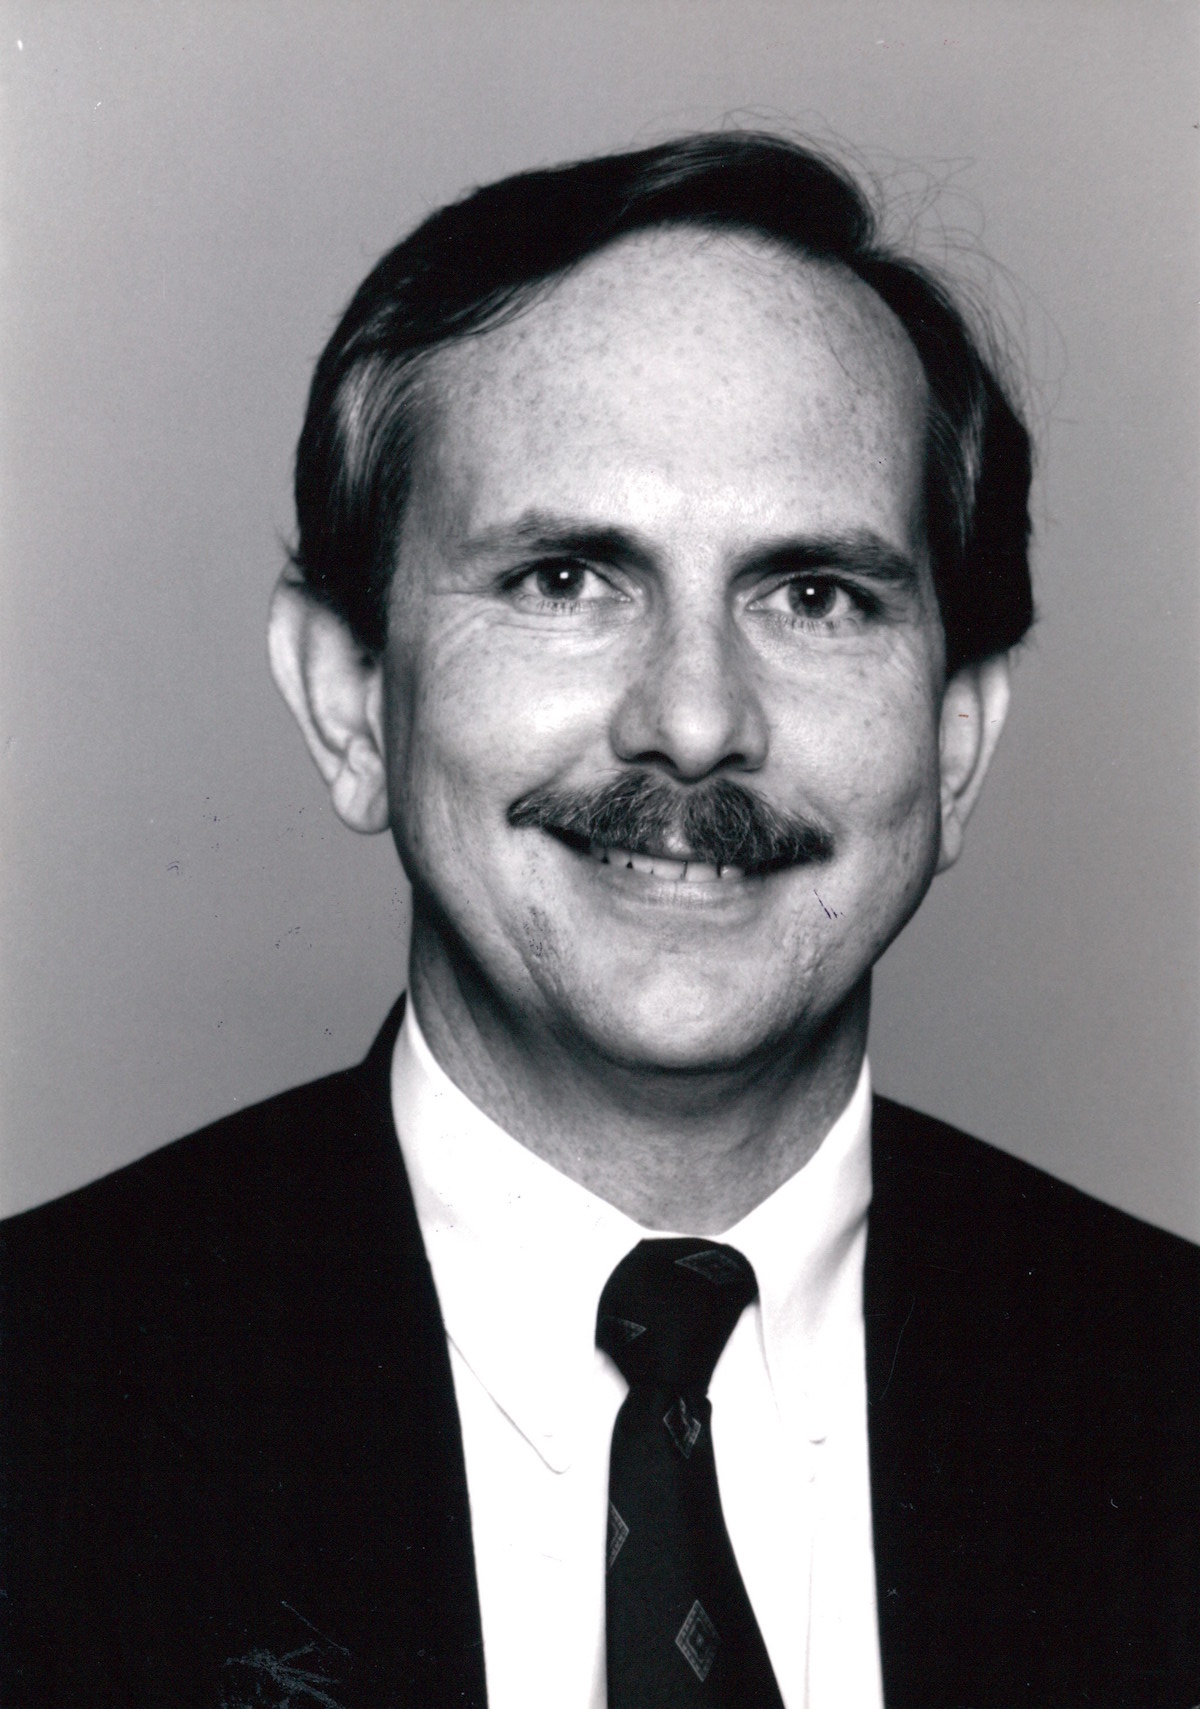 William Waybourn’s official Dallas Gay Alliance headshot, Dallas, TX, circa 1985. William shares, “I enforced a rule that whenever LGBTQ activists appeared in the media, they had to wear a coat and tie or dress to skew stereotypical images of our community.” Photo courtesy of William Waybourn.